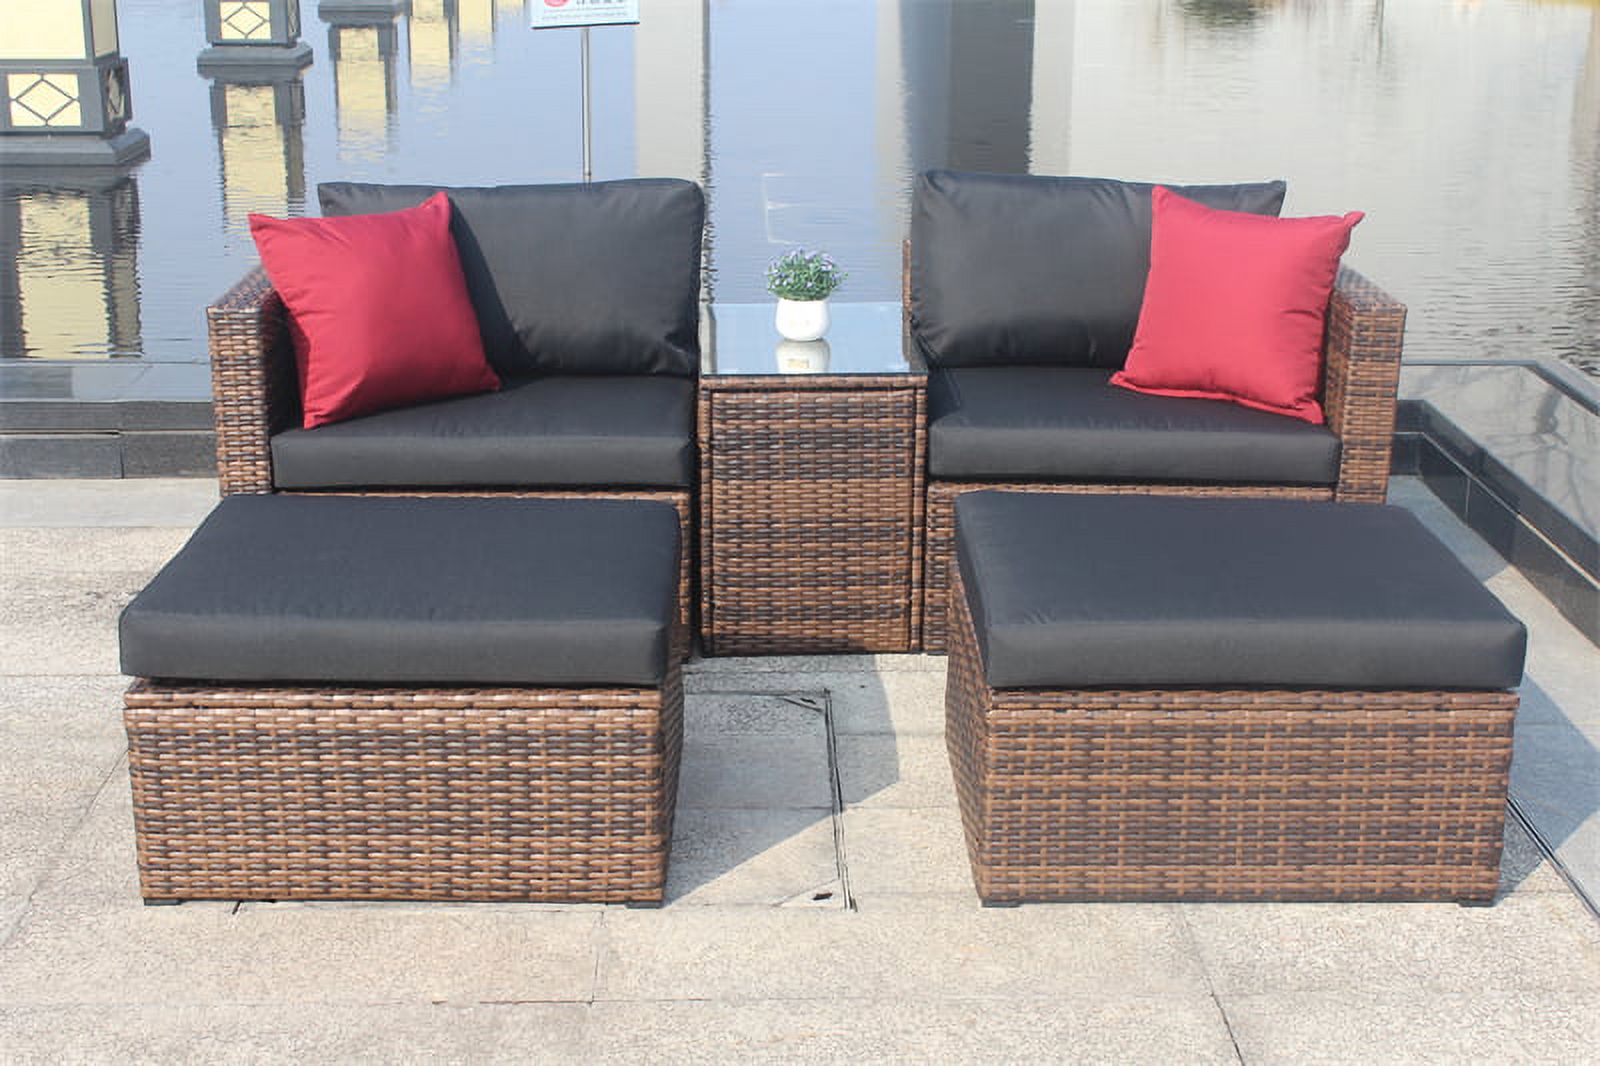 5 Pieces Outdoor Patio Sectional Sofa Set, Rattan and Black Cushion with Weather Protecting Cover, Patio Sofa Sets with 2 Rattan Chairs, 2 Pieces Patio Rattan Ottomans and Coffee Table - image 2 of 7